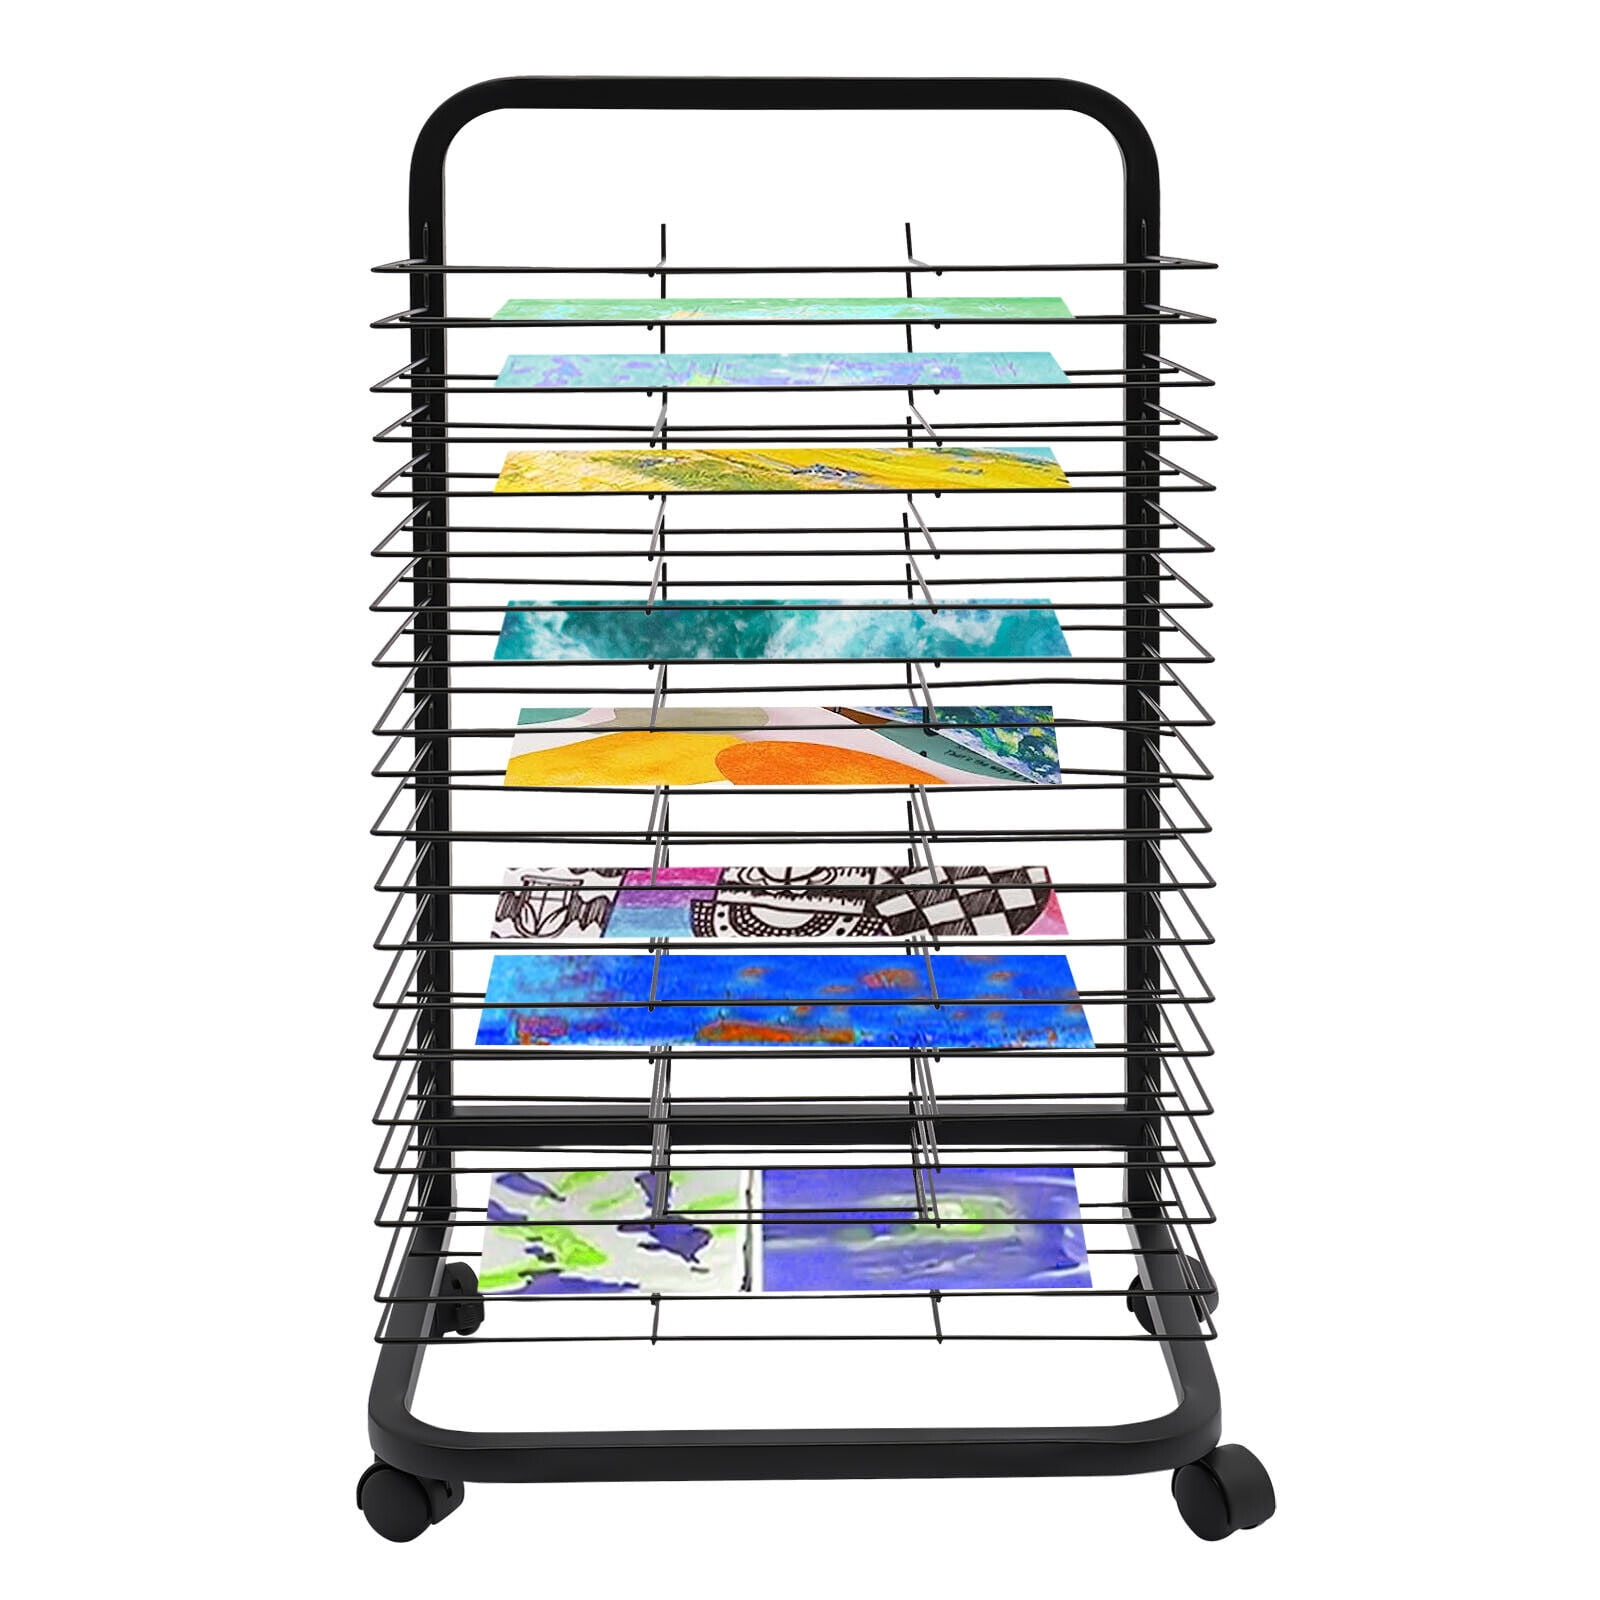 Art Drying Rack for Classroom Drying Rack，Art Drying Rack for Art Metal  Wire Work Display Rack, Art Carts with Wheels for Classroom Art Studios and